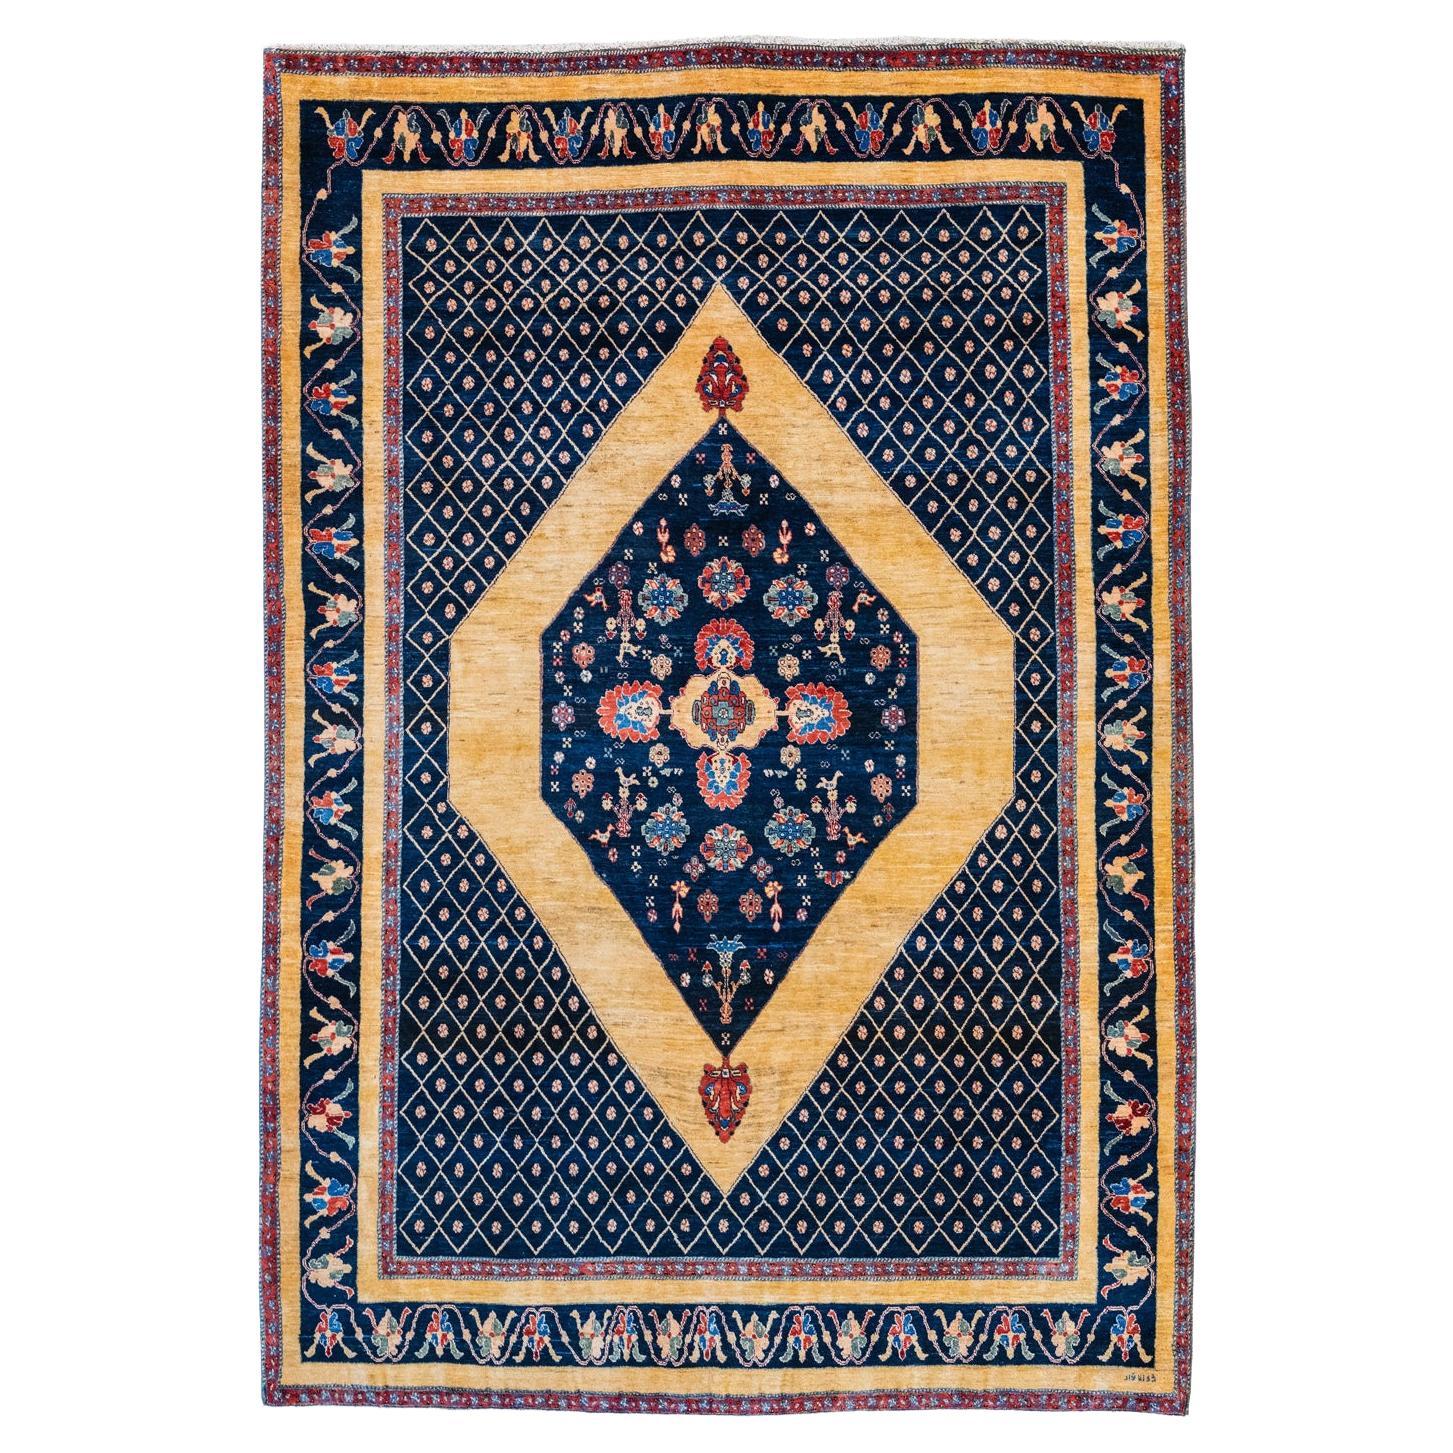 Gold and Indigo Persian Shekarloo Carpet, Wool, Hand-Knotted, 7' x 9'